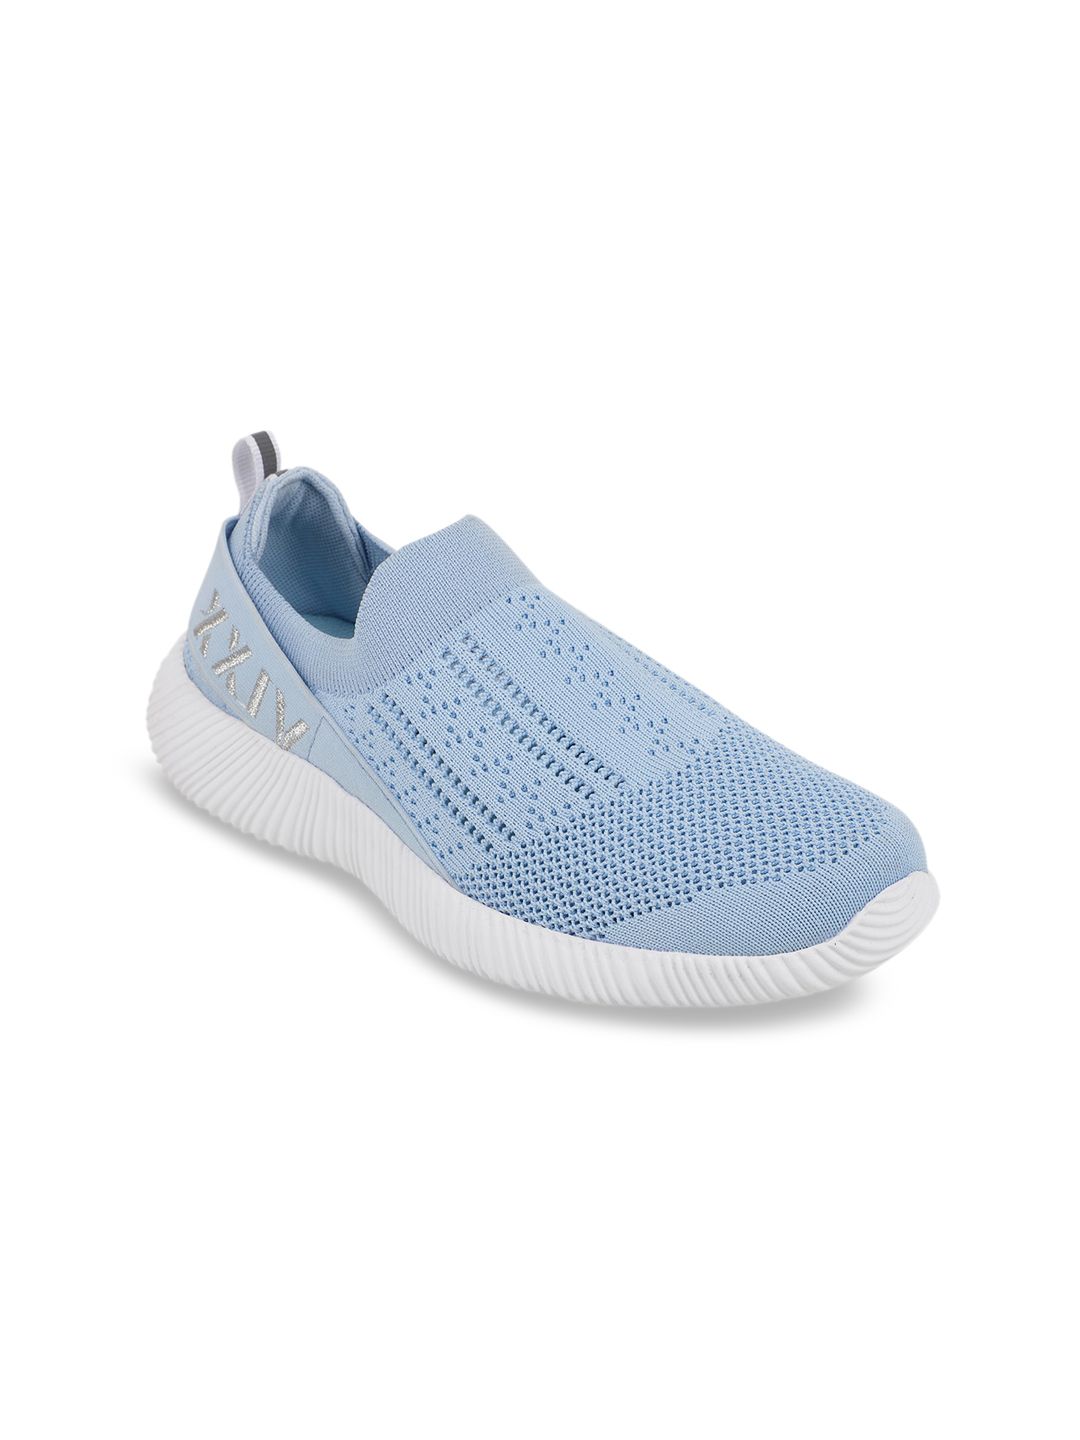 KazarMax Women Blue Mesh Training or Gym Shoes Price in India